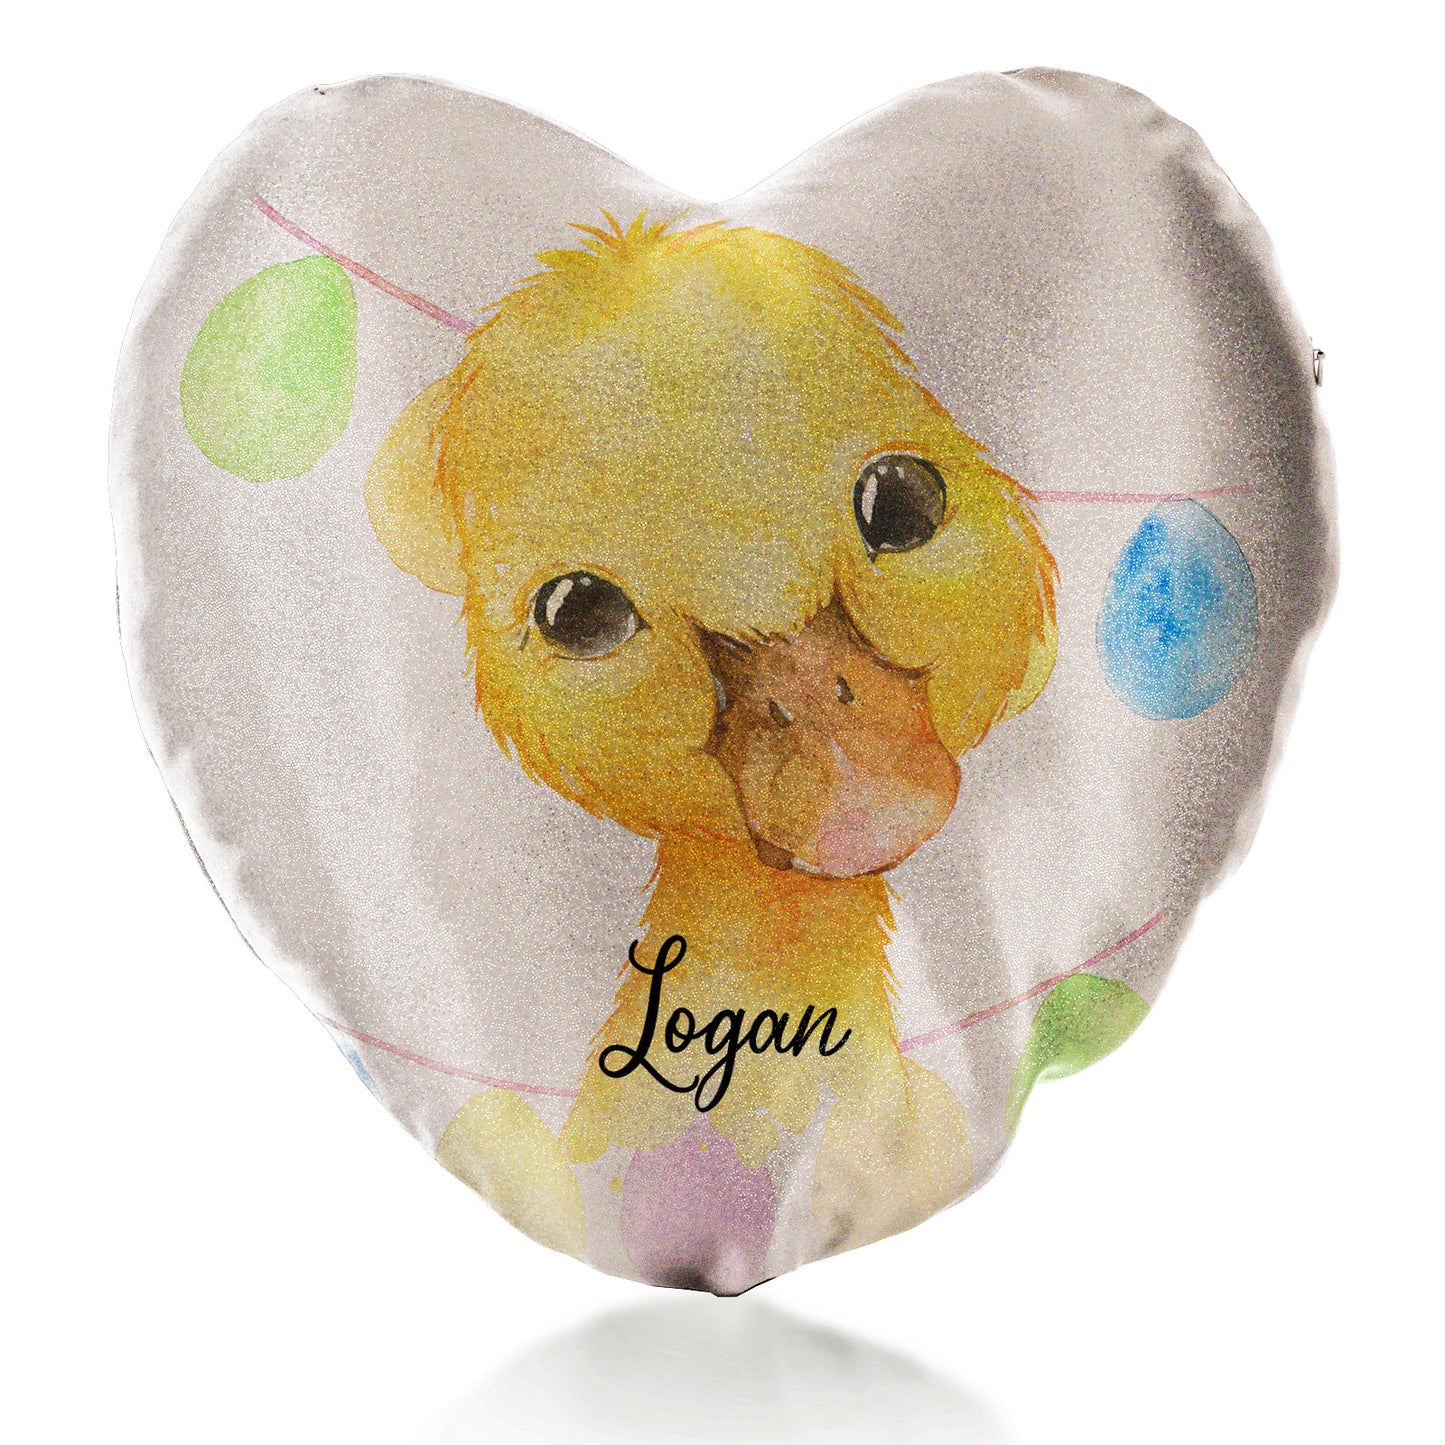 Personalised Glitter Heart Cushion with Yellow Duck Multicolour Buntin and Cute Text